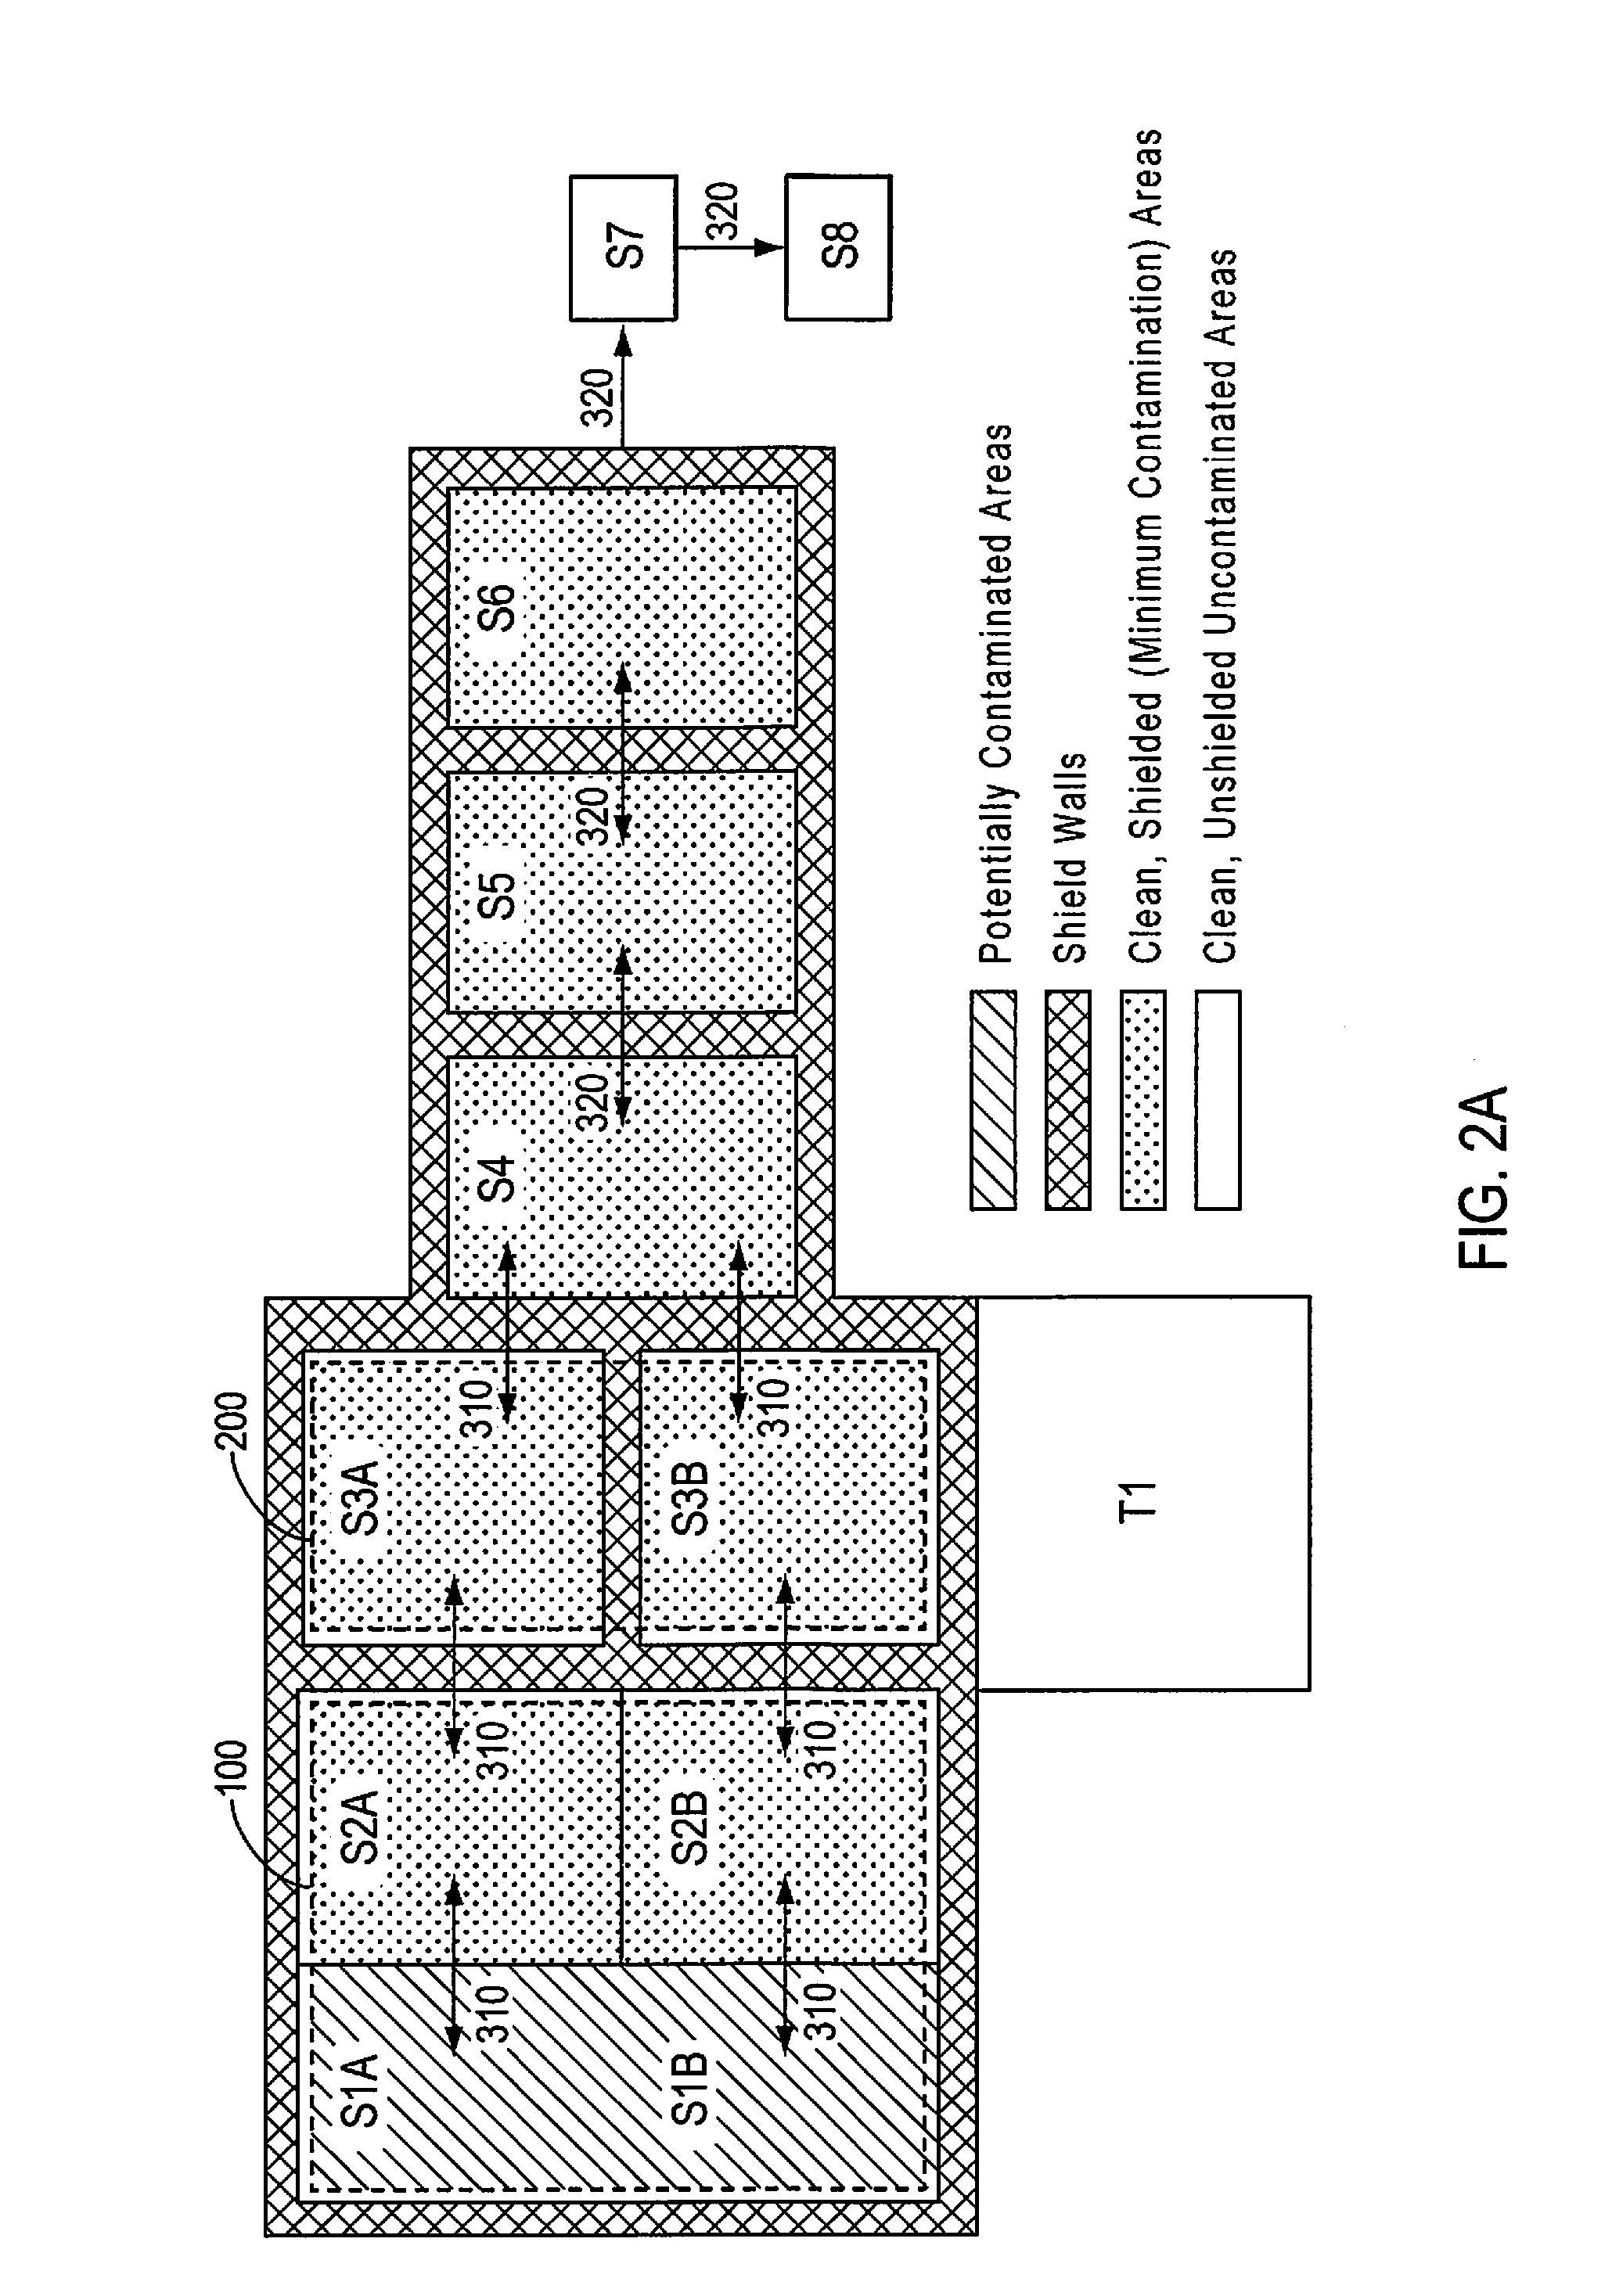 Methods of consolidating radioactive containing materials by hot isostatic pressing